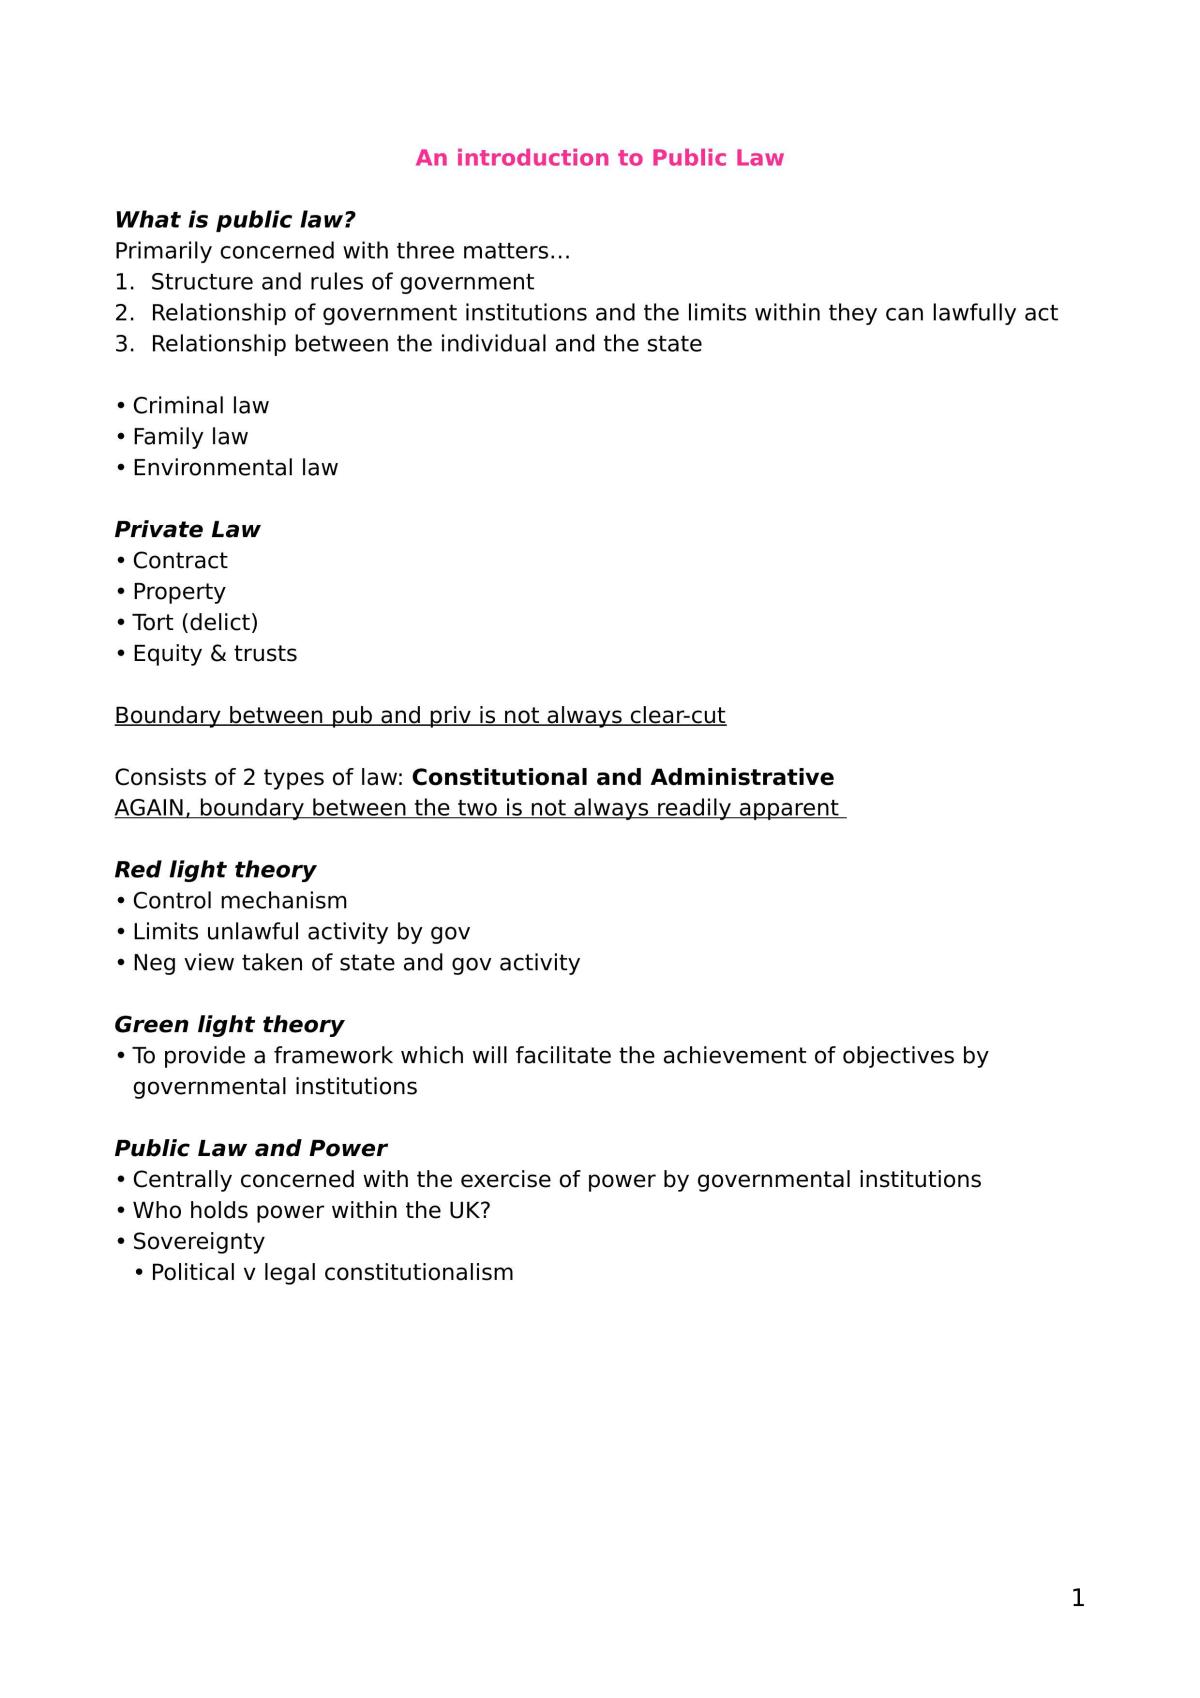 Public Law I - Sources of Power Revision Guide - Page 1